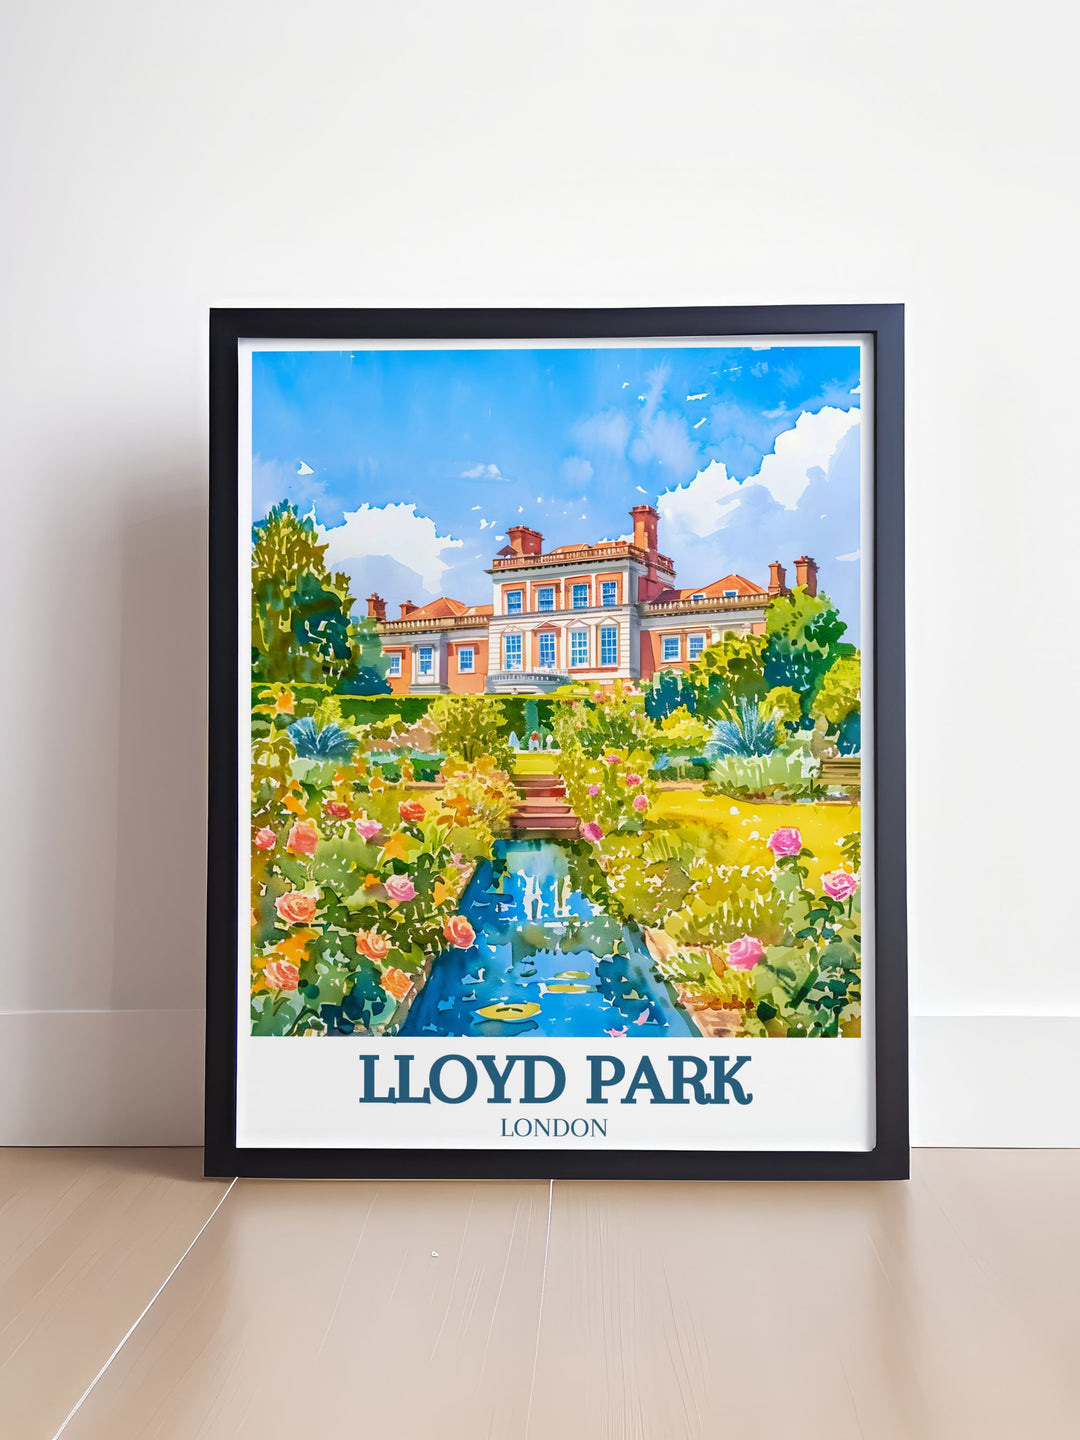 Captivating East London print of Lloyd Park showcasing the serene rose garden at William Morris gallery. Ideal for those who love Walthamstow London and its artistic heritage. A beautiful addition to your bucket list prints collection. Enhance your space with this timeless artwork